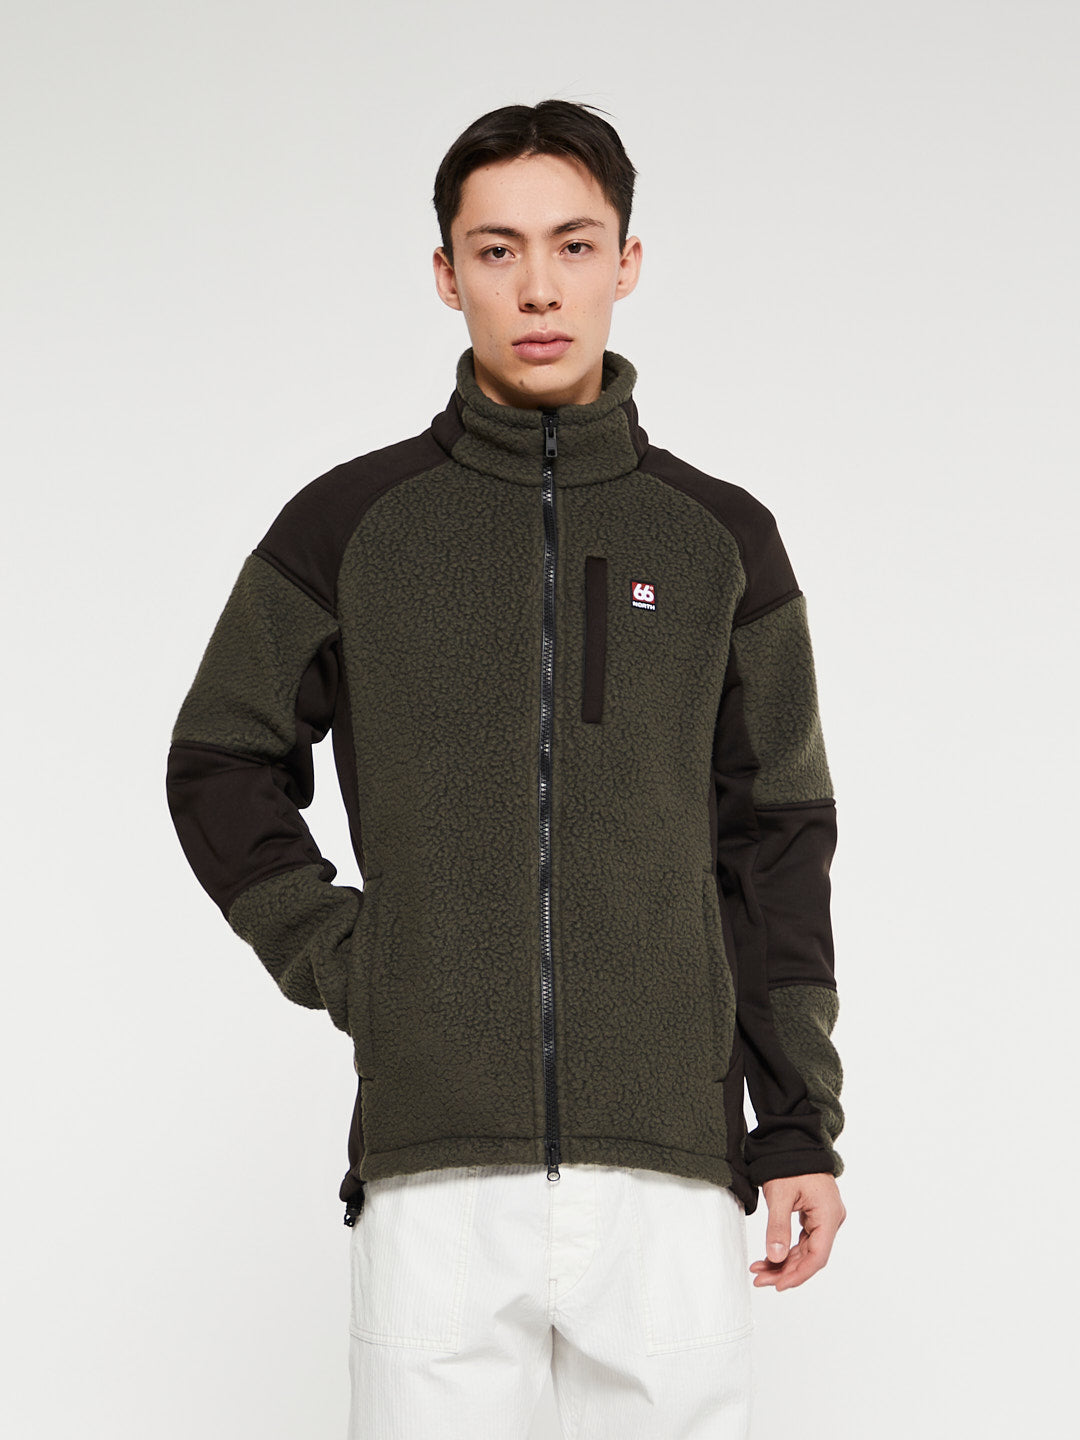 66 North - Tindur Technical Shearling Jacket in Green